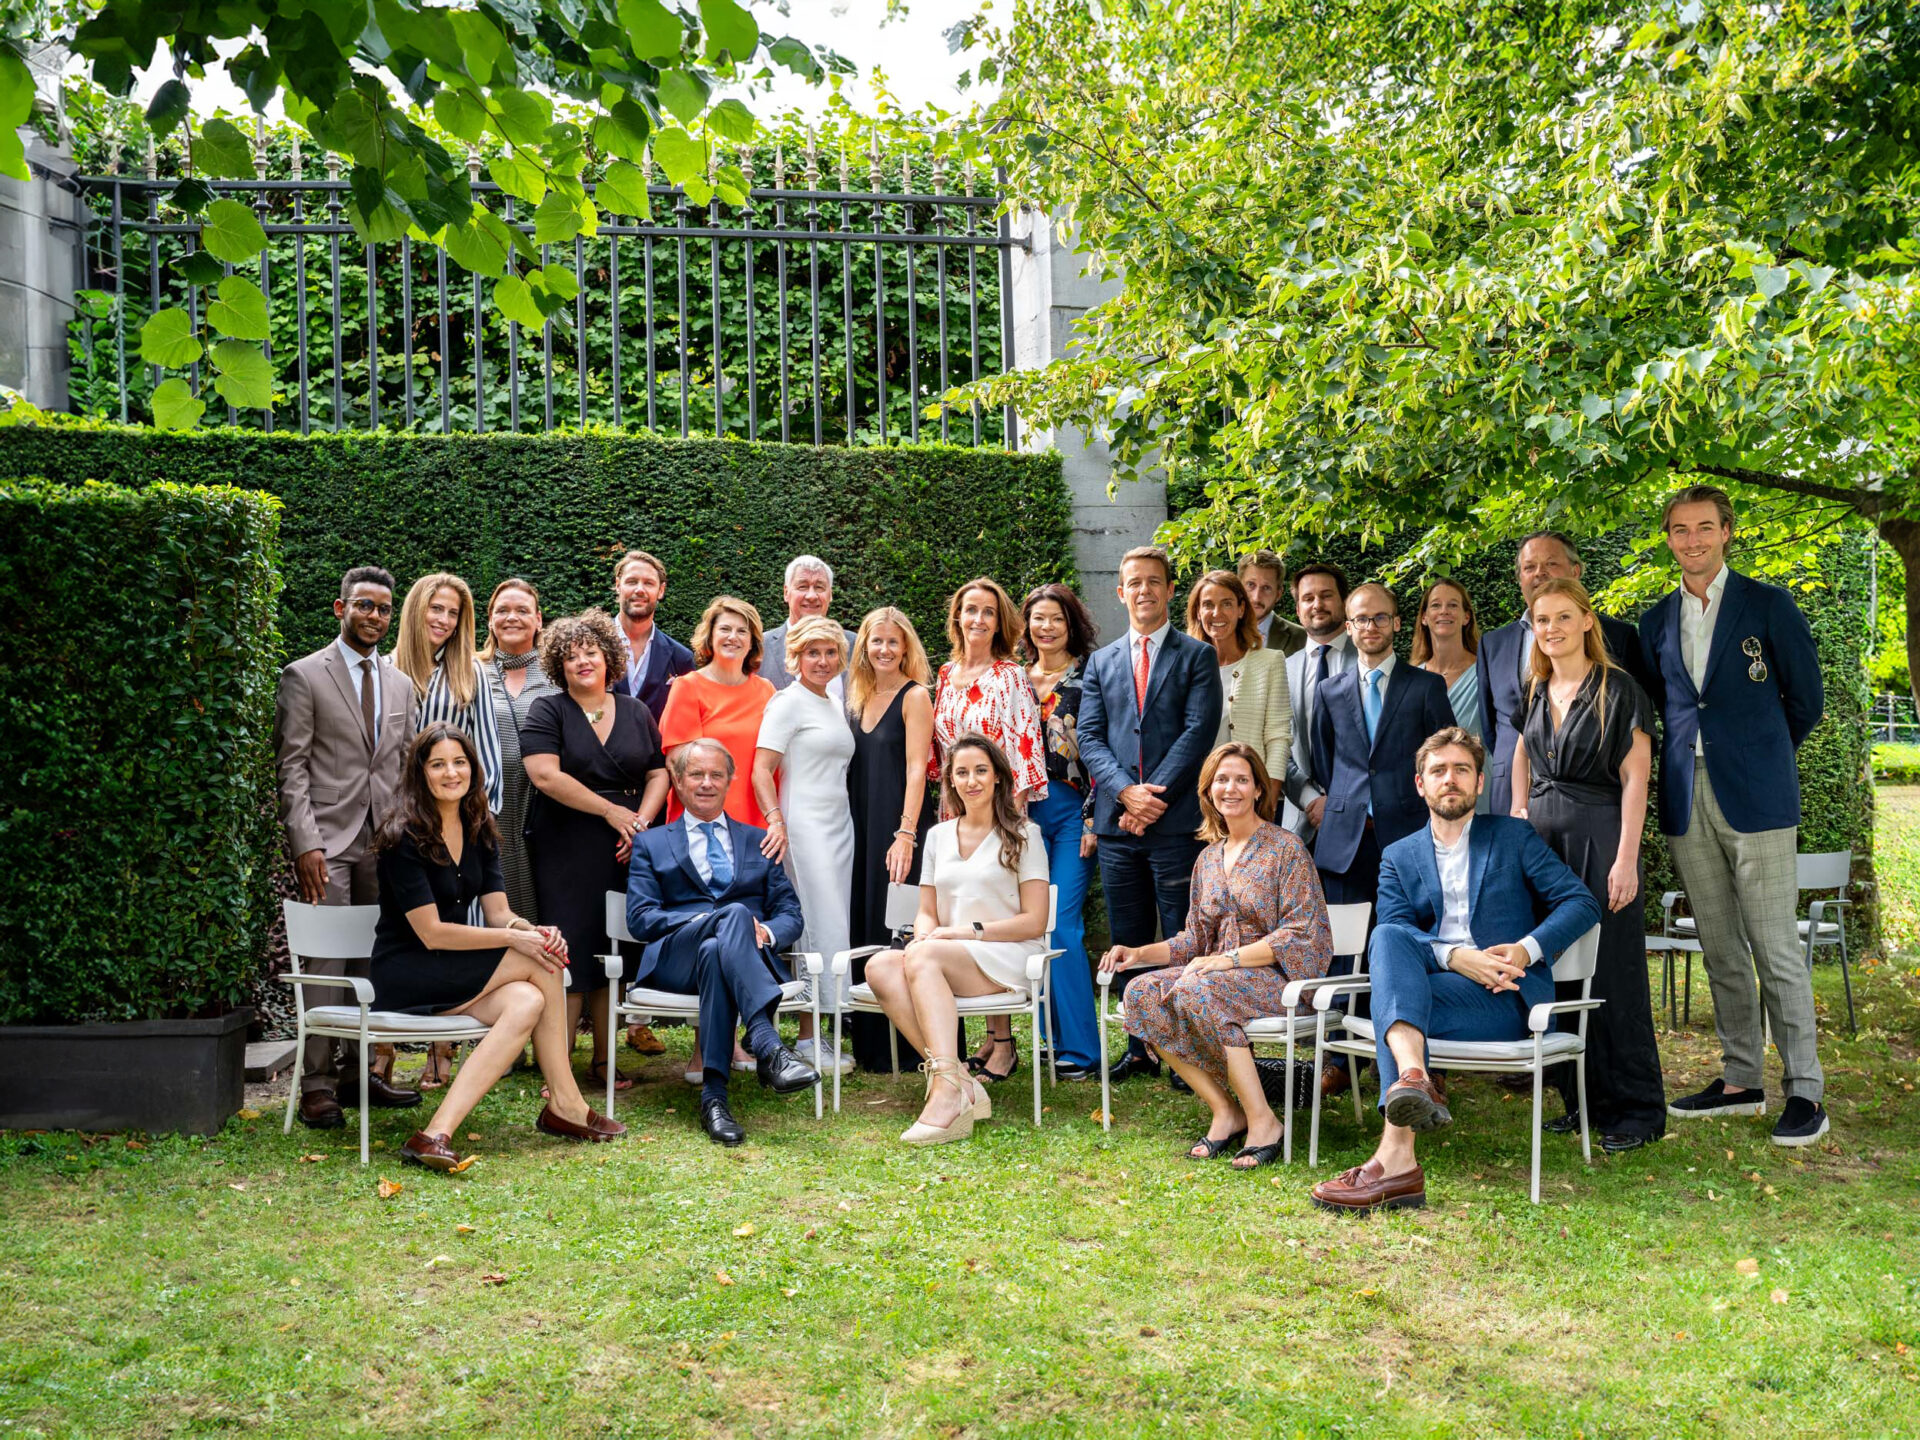 Belgium Sothebys Int. Realty About us